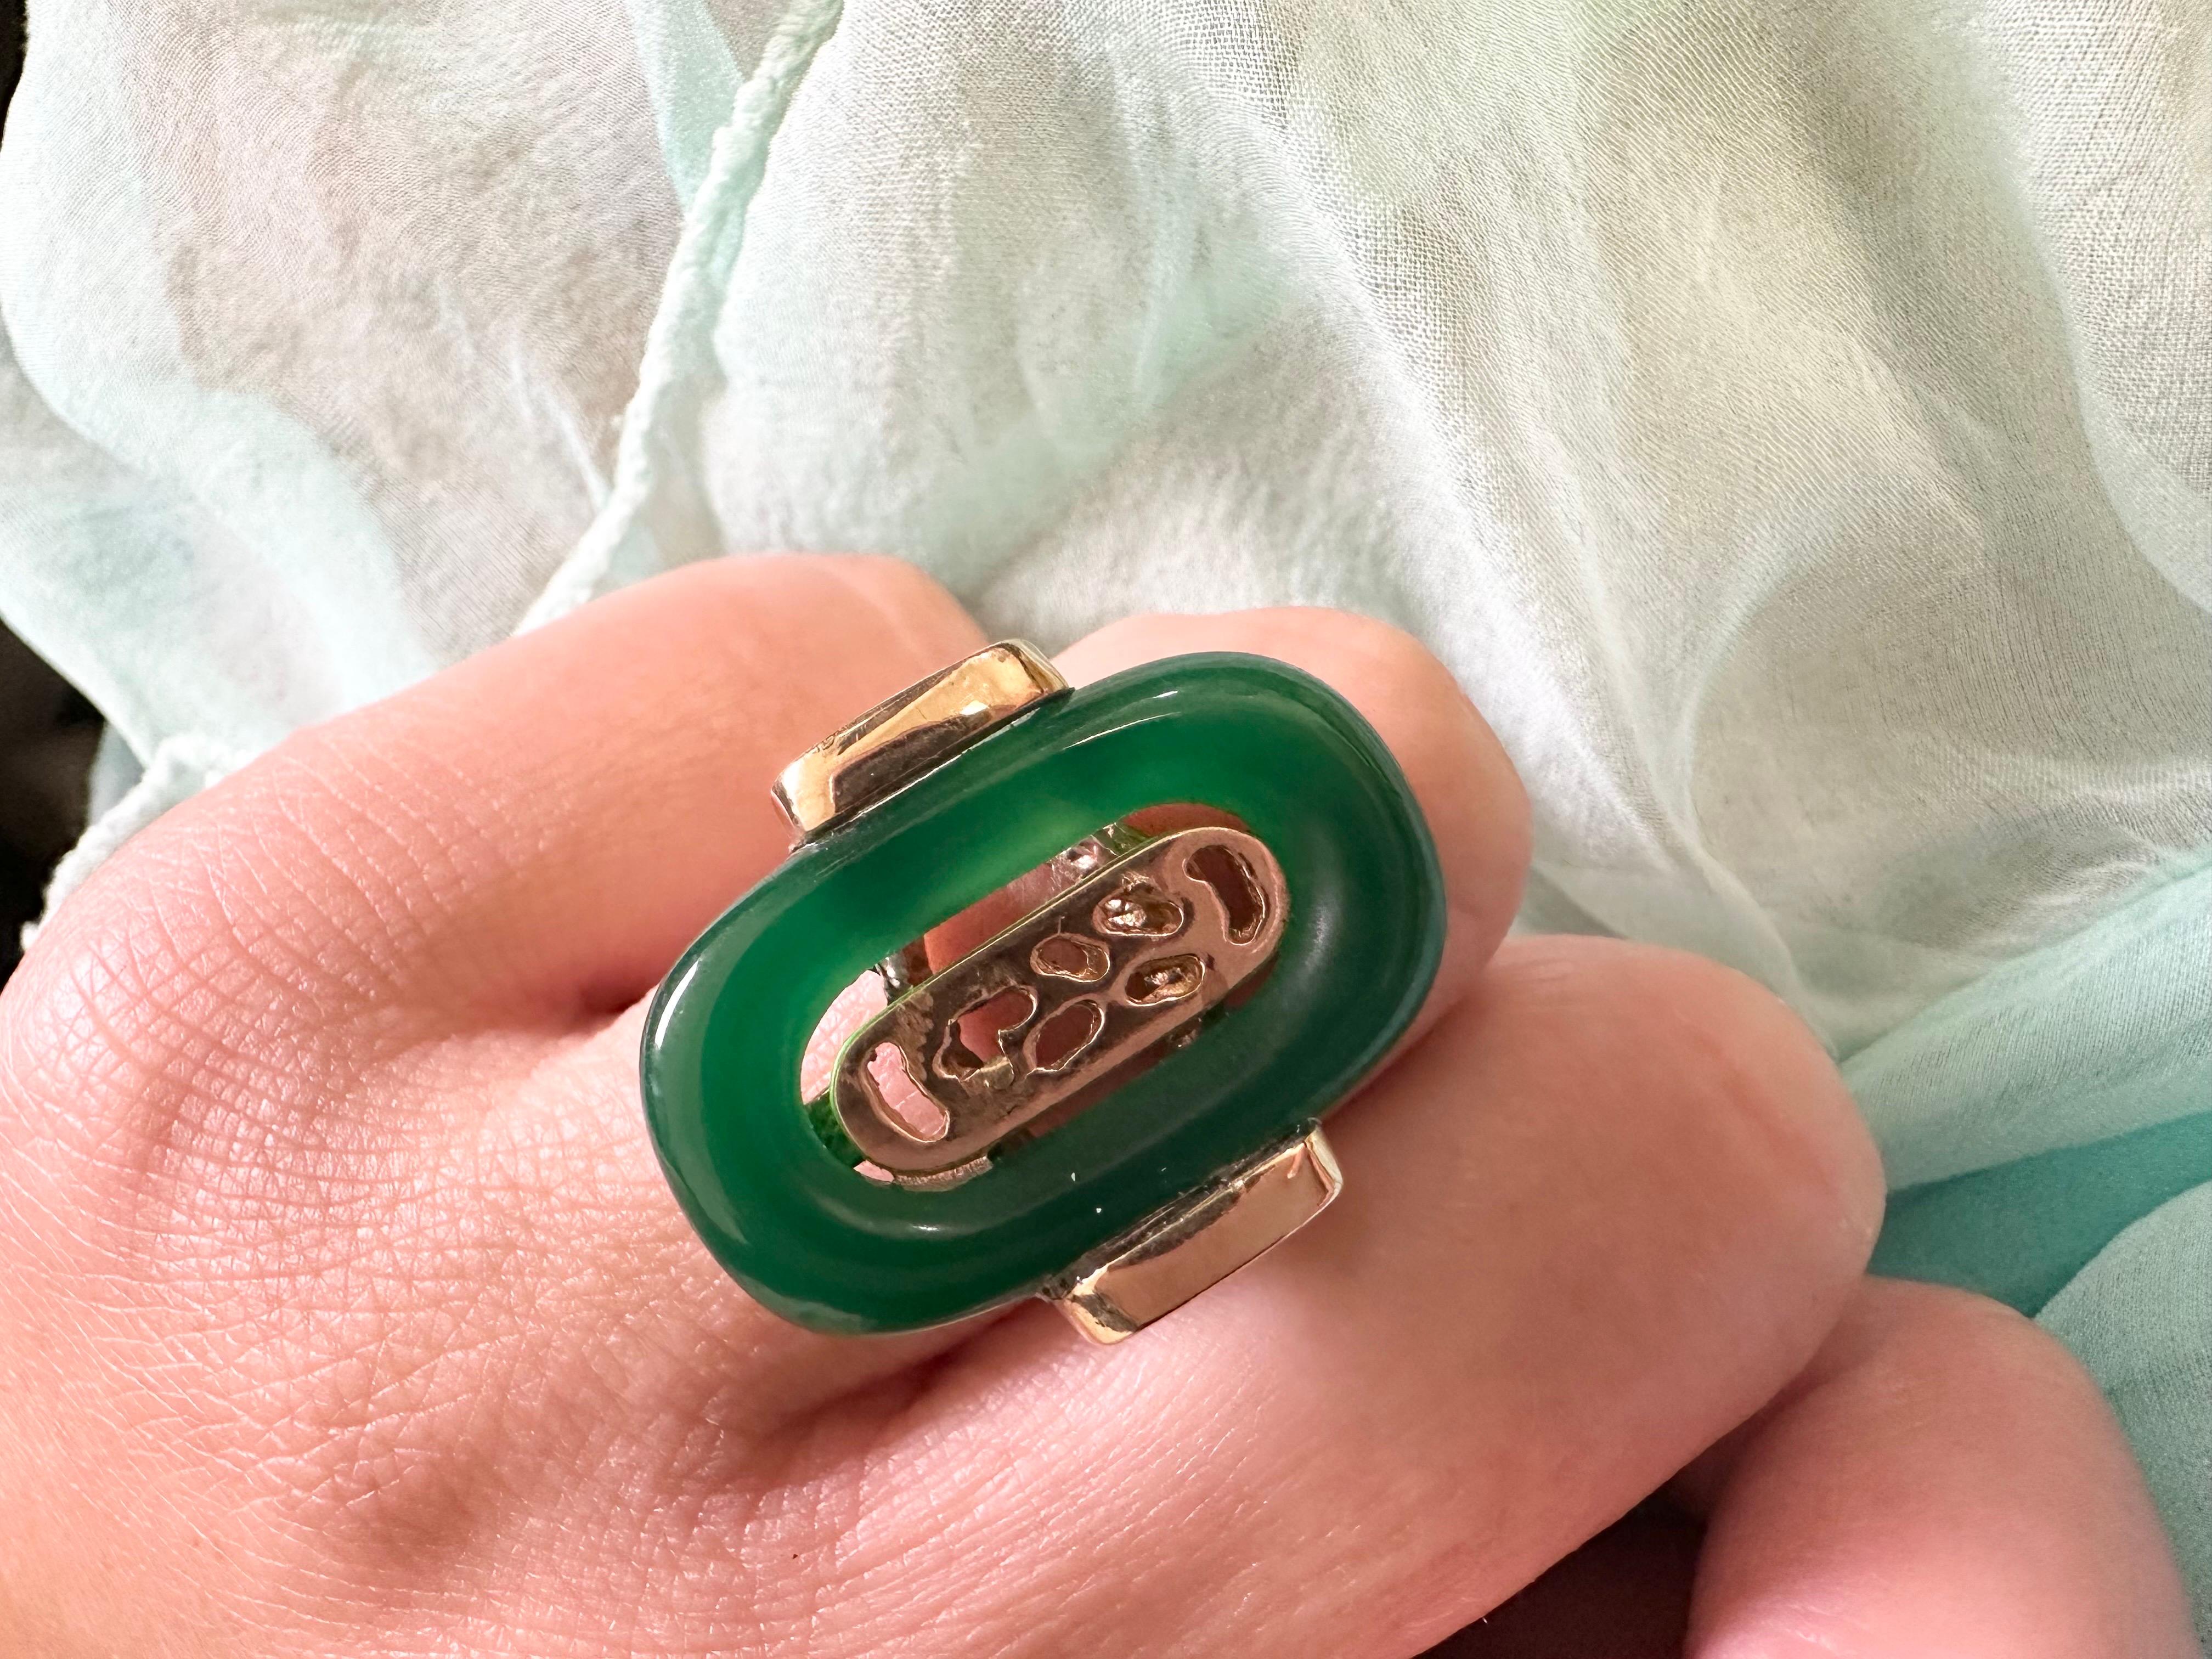 Stunning green onyx ring in 14KT yellow gold, the artist who made this ring made the center slightly tilted to the side making this a unique modern representation.

Metal Type: 14KT solid yellow gold
Gram Weight:8.60 grams 

Natural Green Onyx(s):